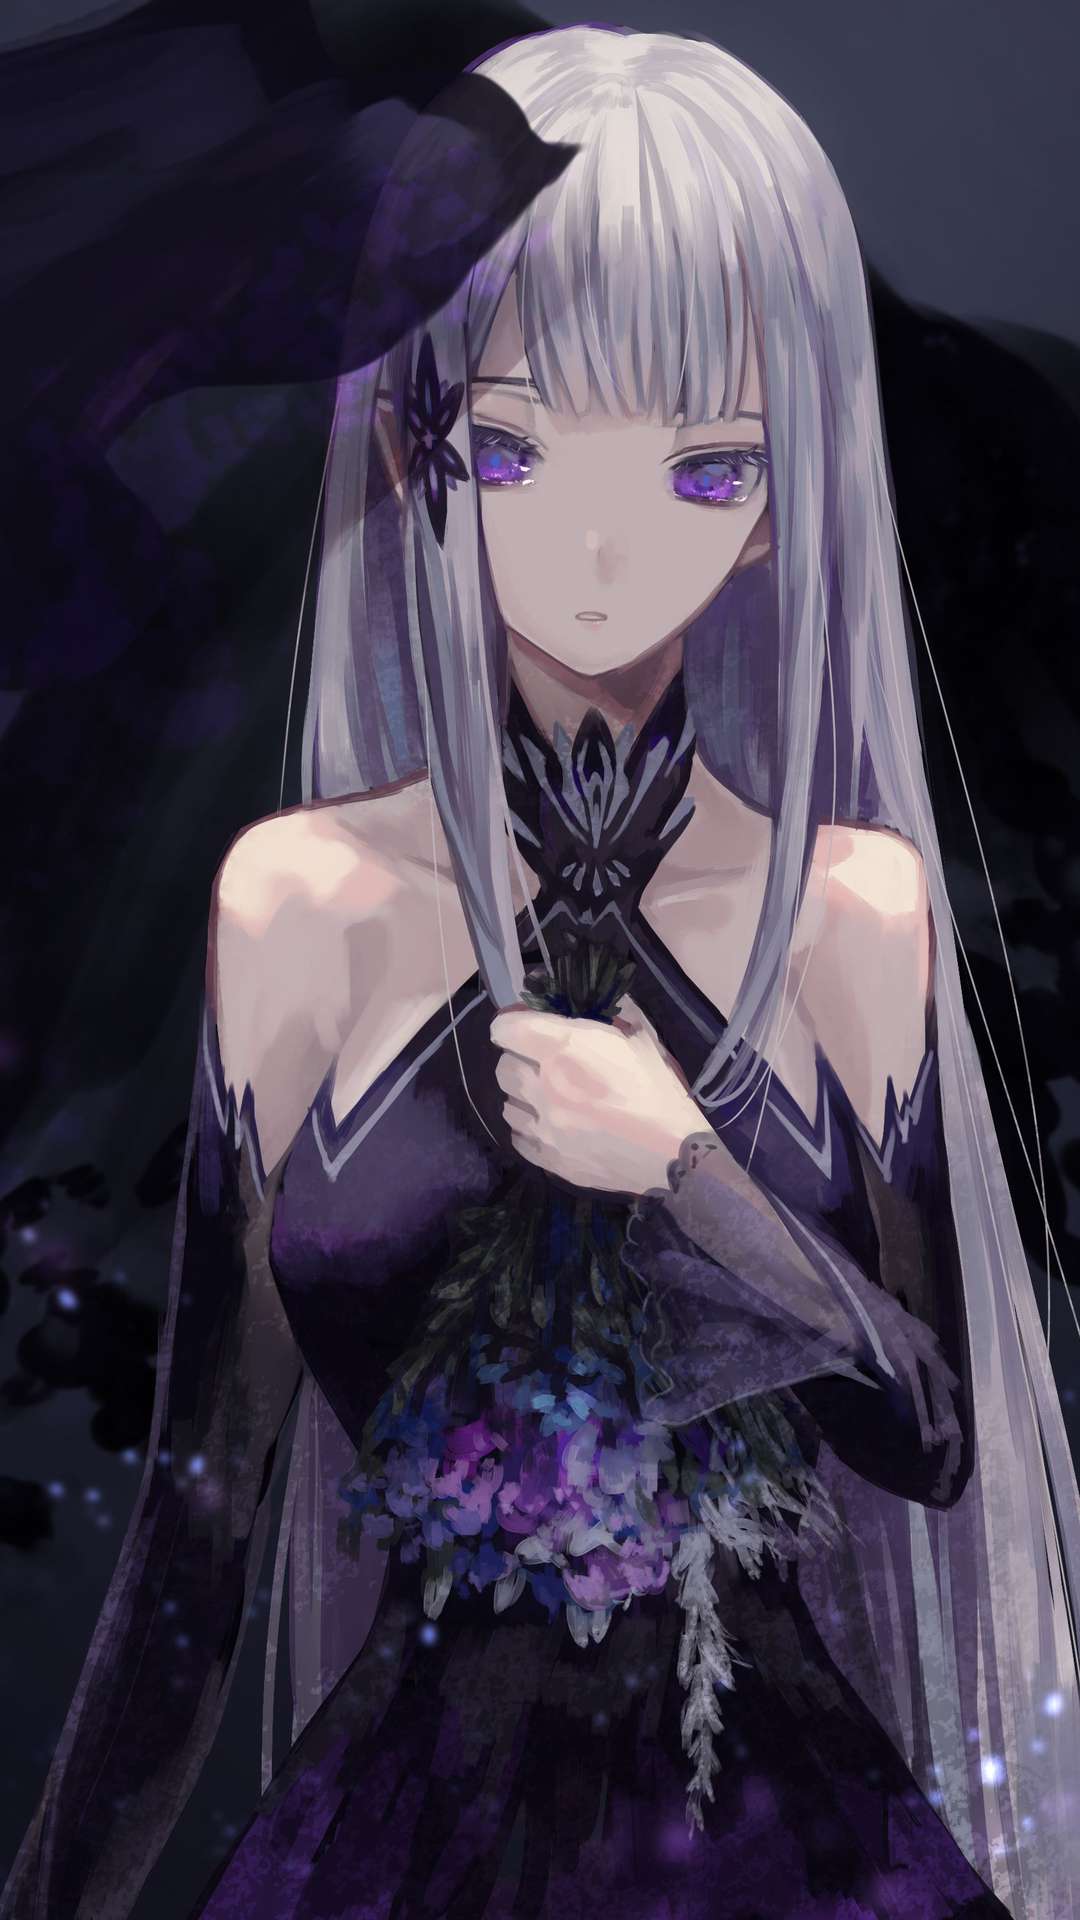 9+ Emilia Re Zero Wallpapers for iPhone and Android by Sara Byrd